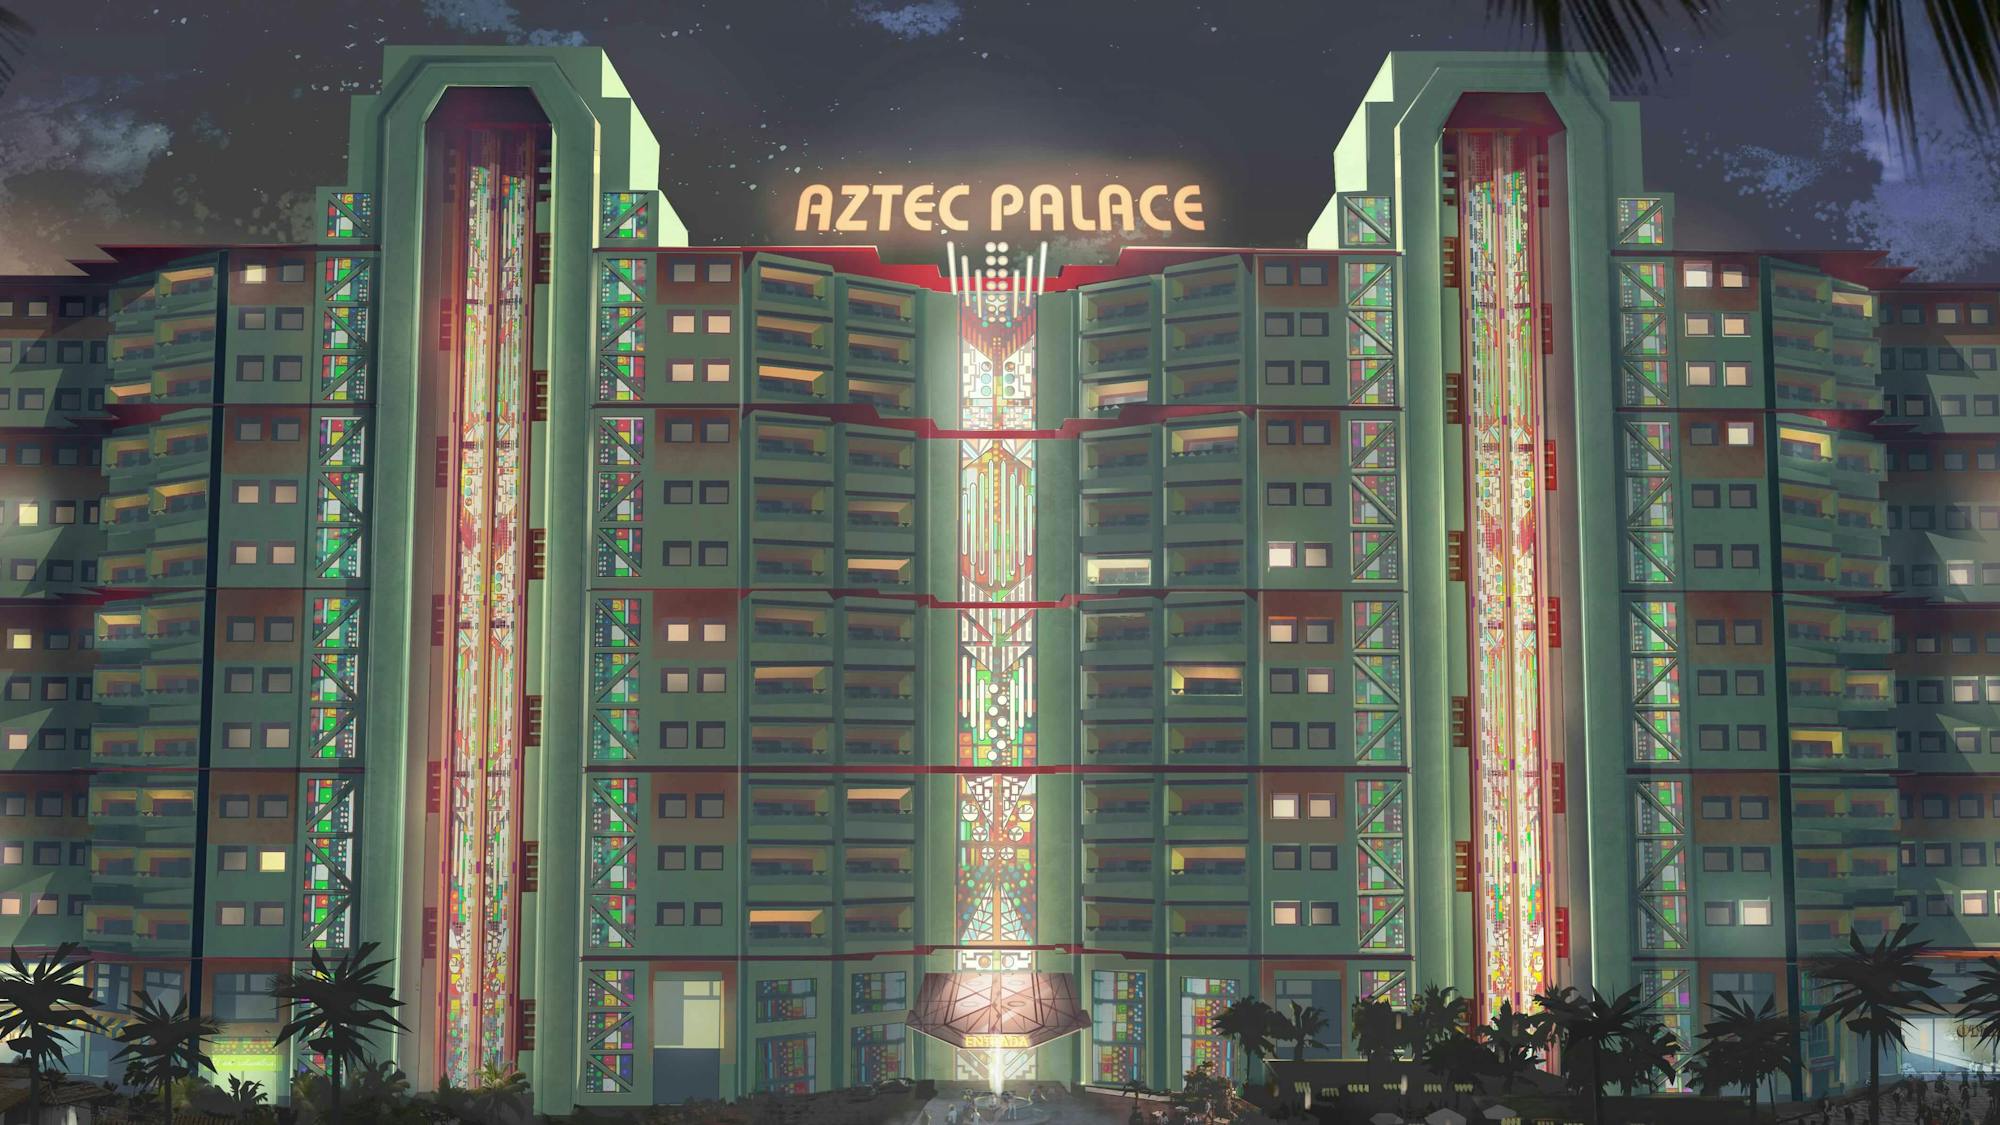 A rendering of the Aztec Palace hotel shines green, red, and yellow against a dramatic dark sky.